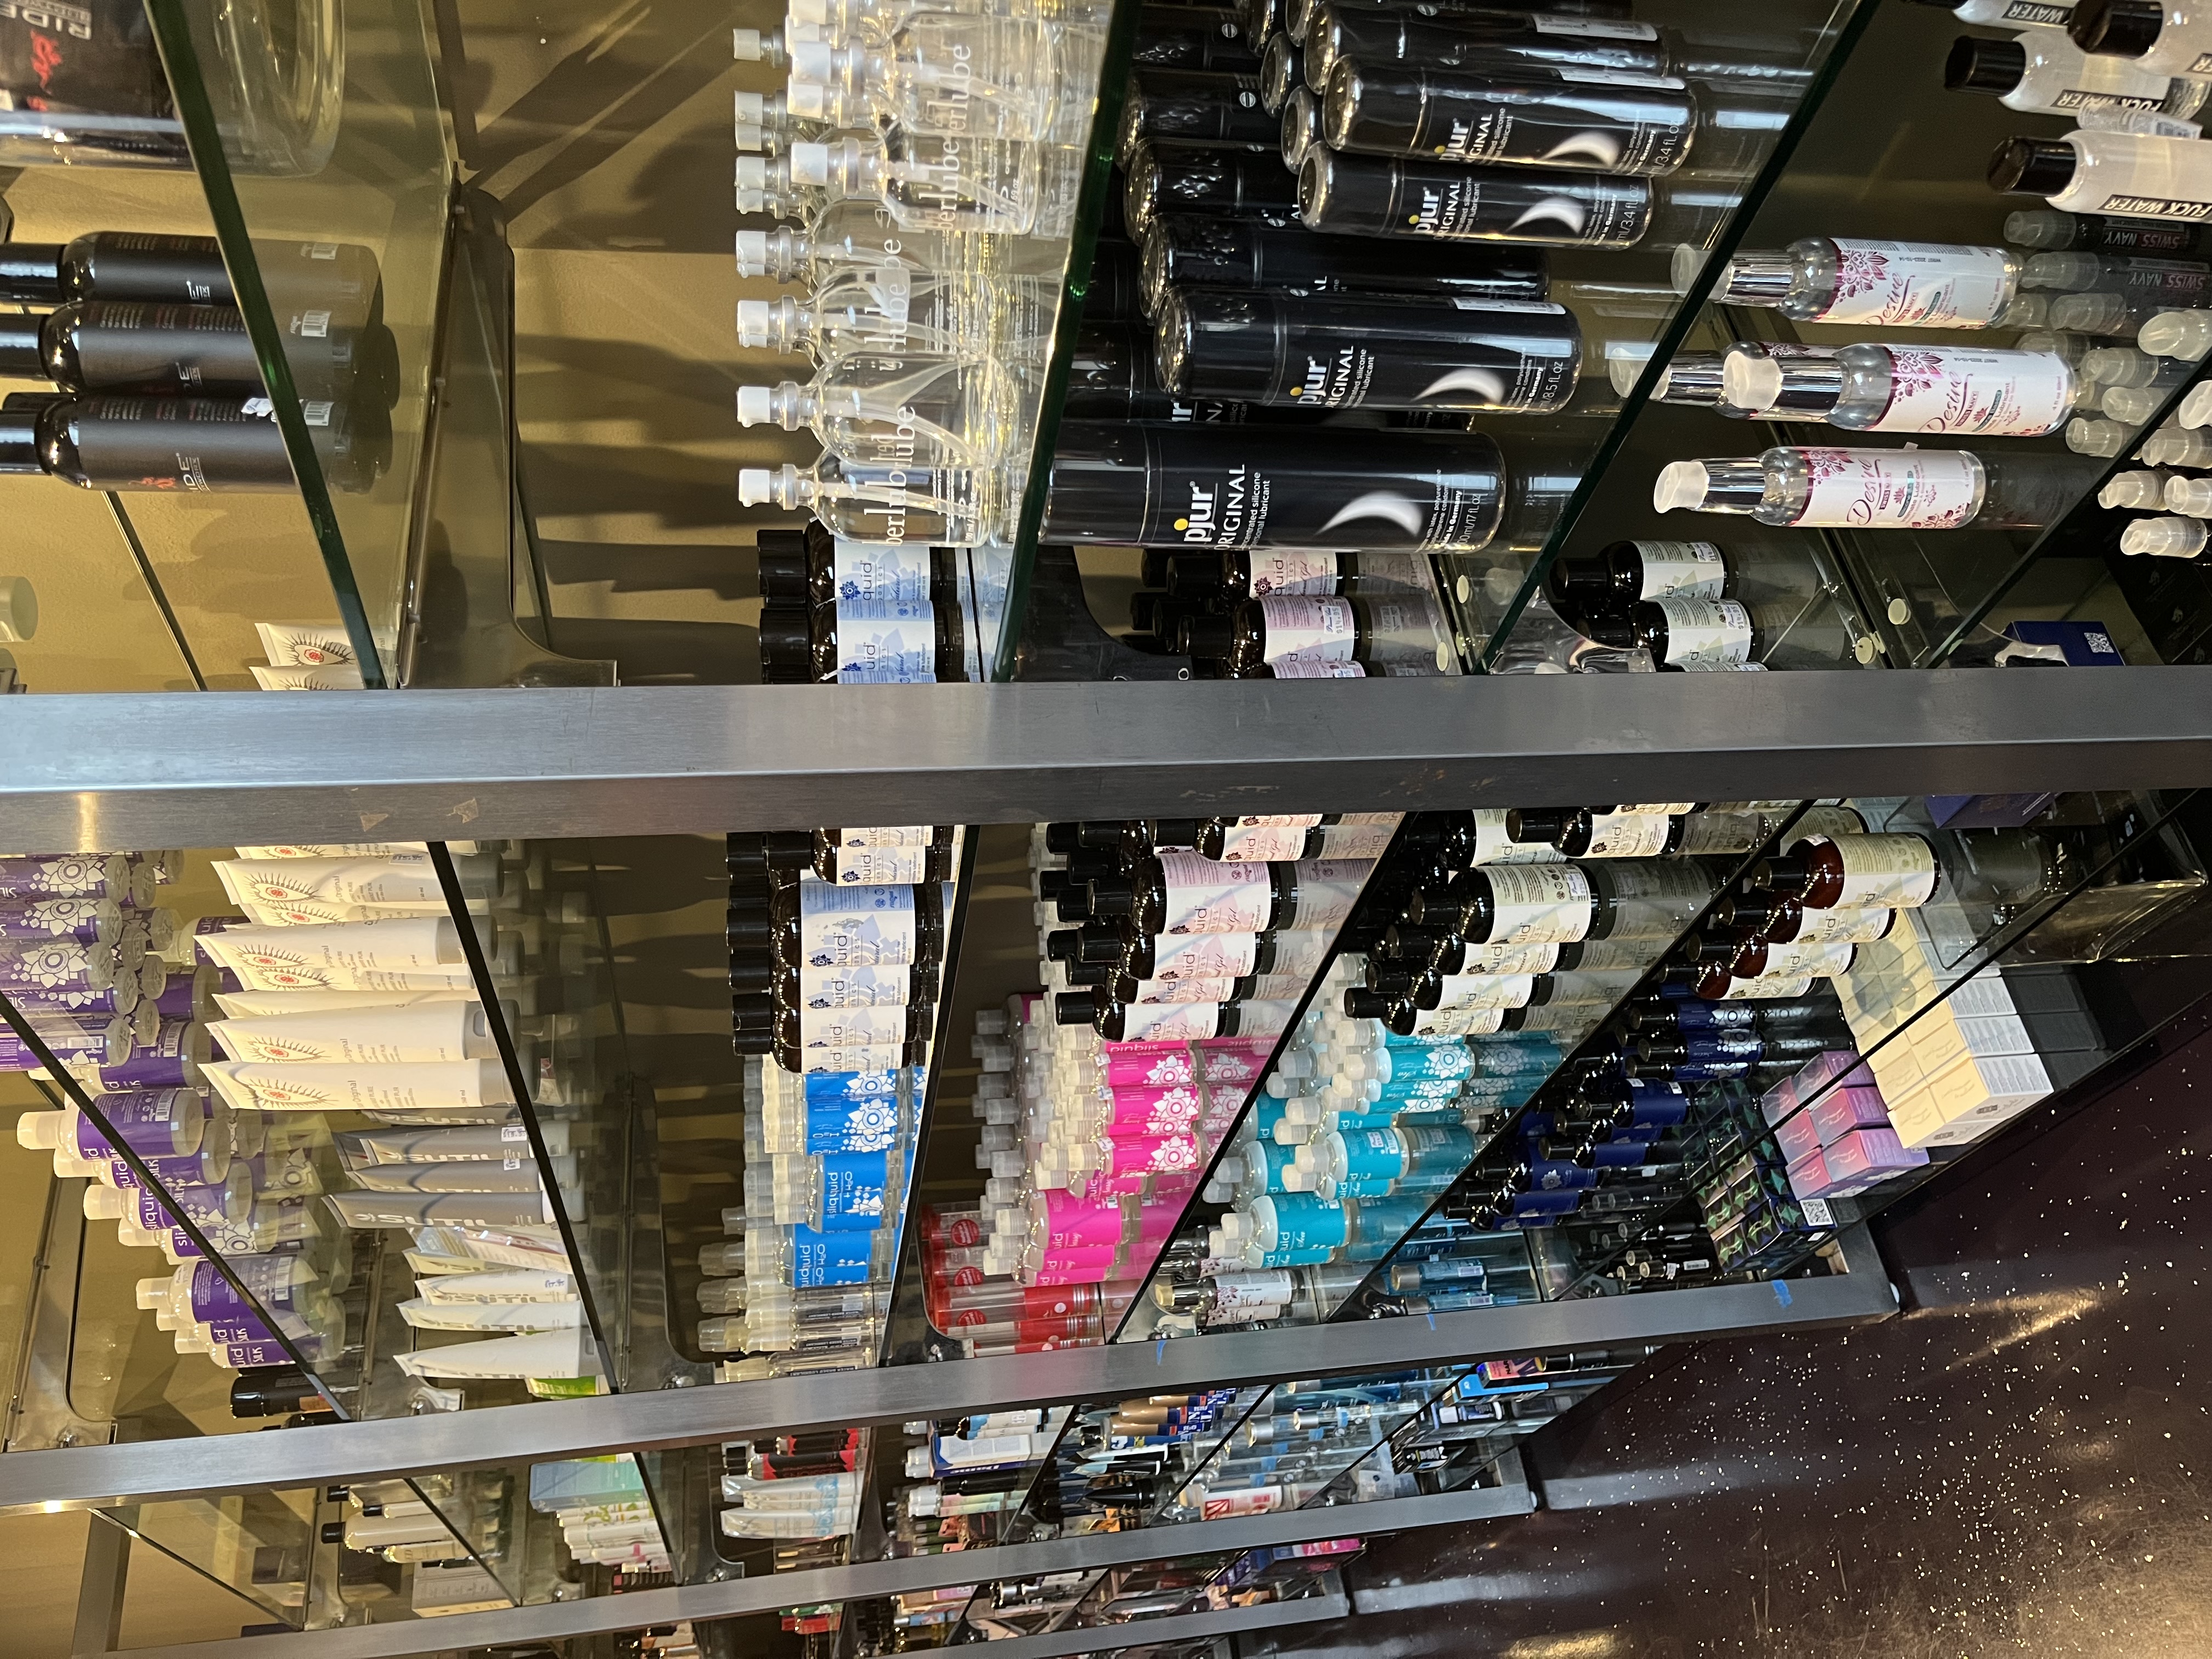 Lube shelves at Pleasure Chest Chicago Wicker Park location